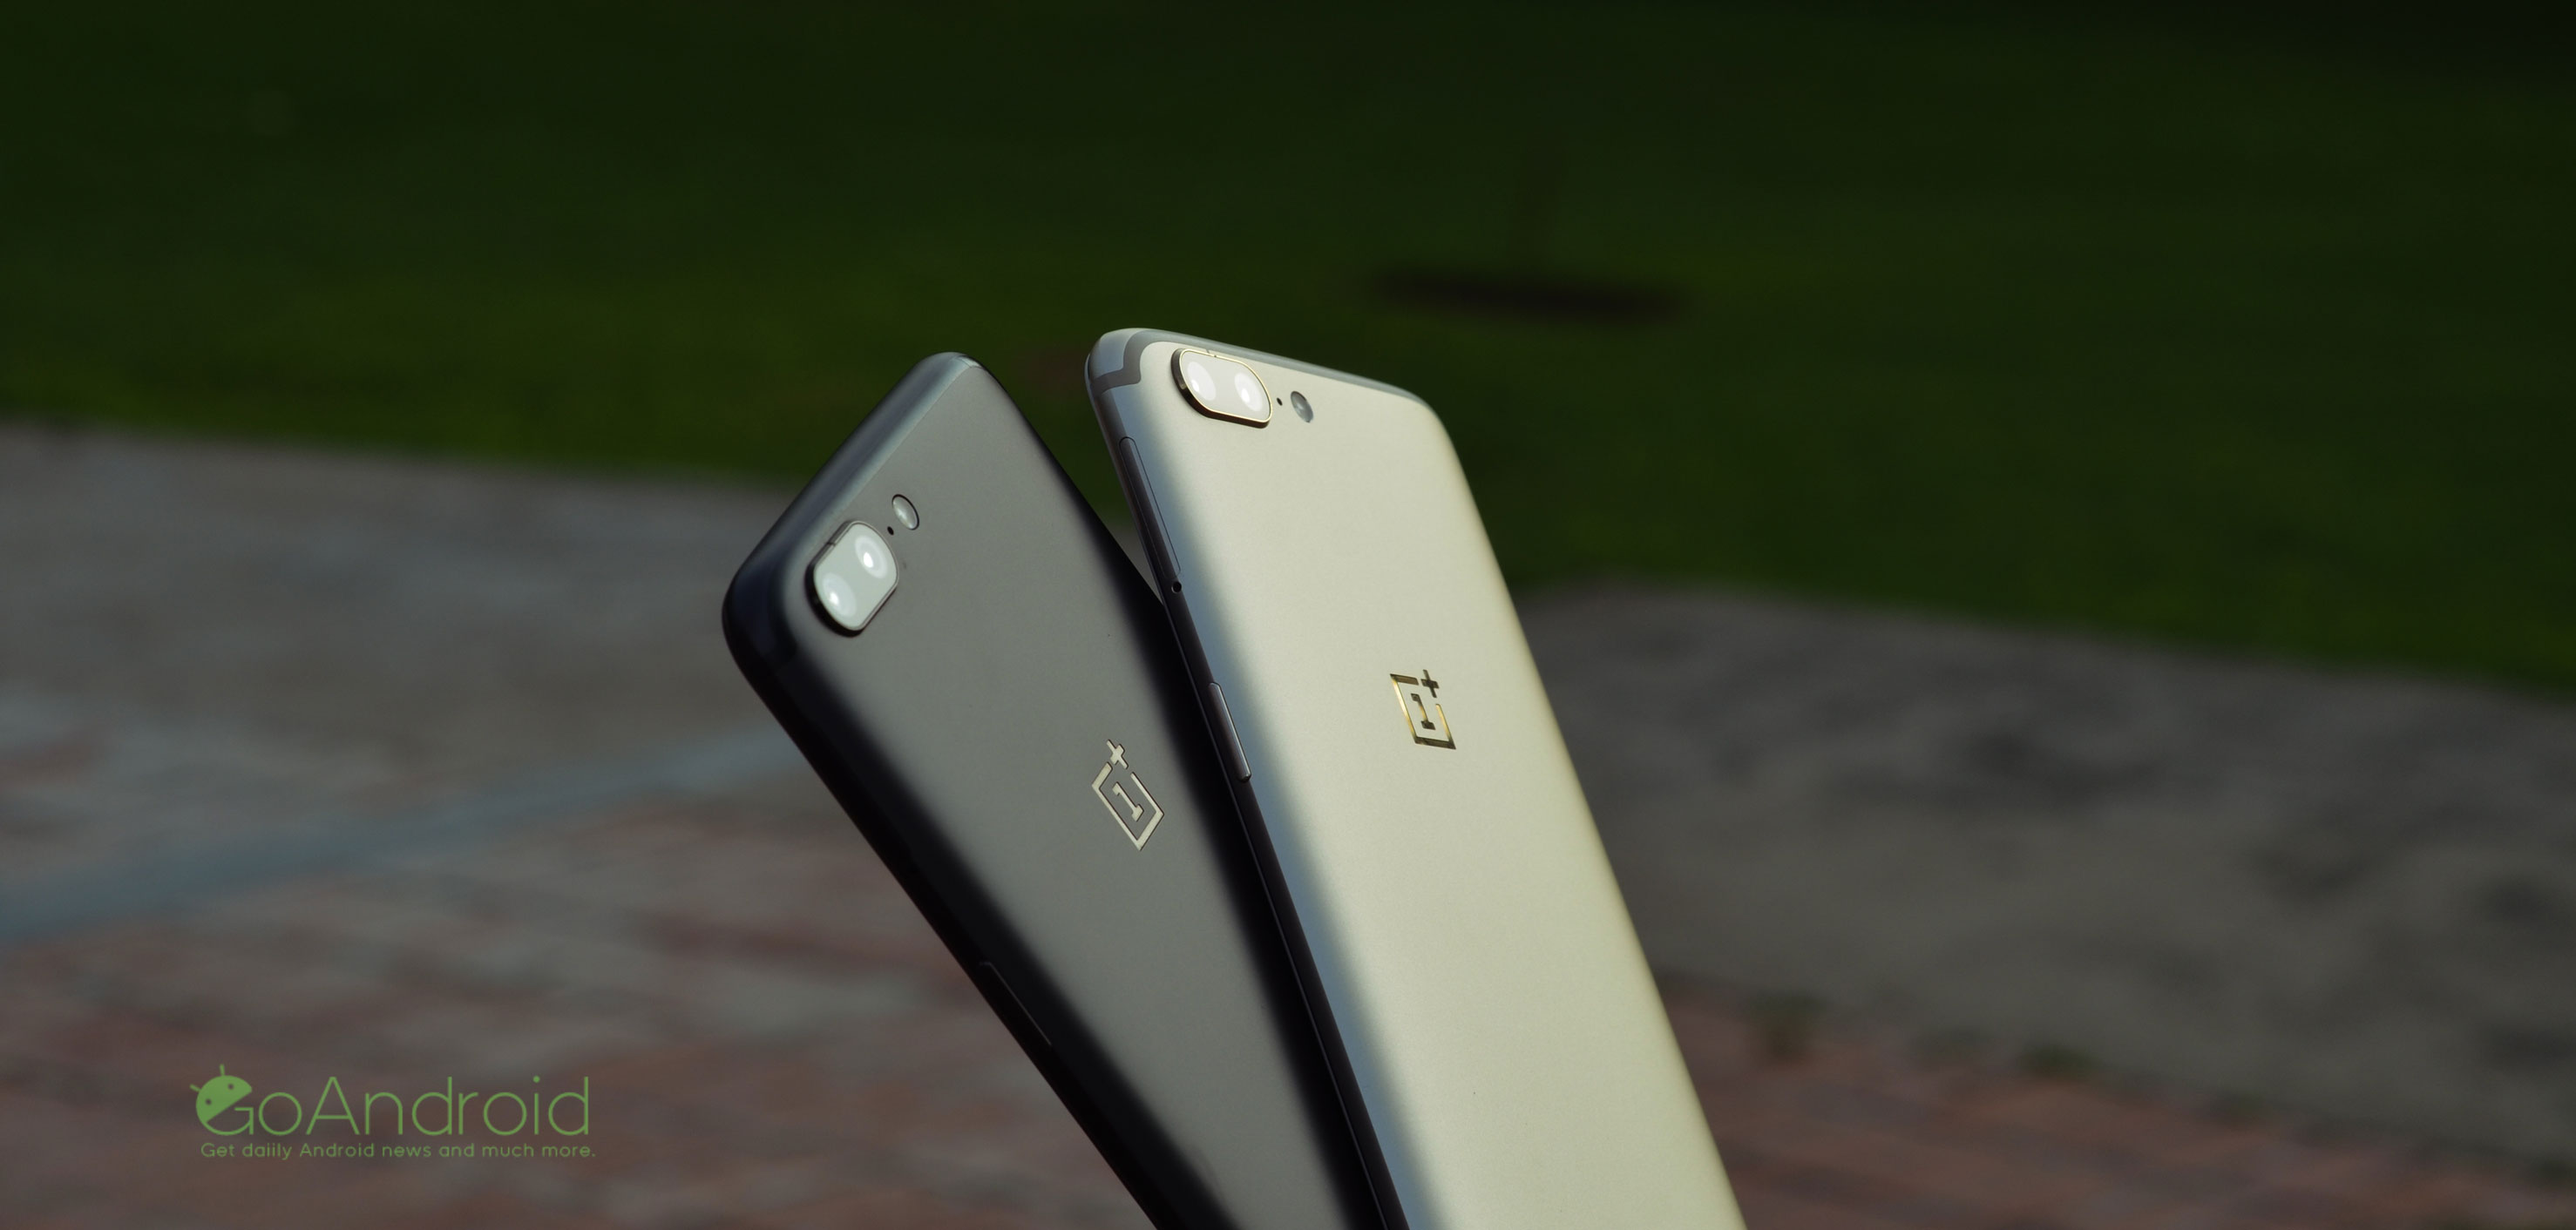 oneplus releases an official video flaunting oneplus 5 video stabilization feature